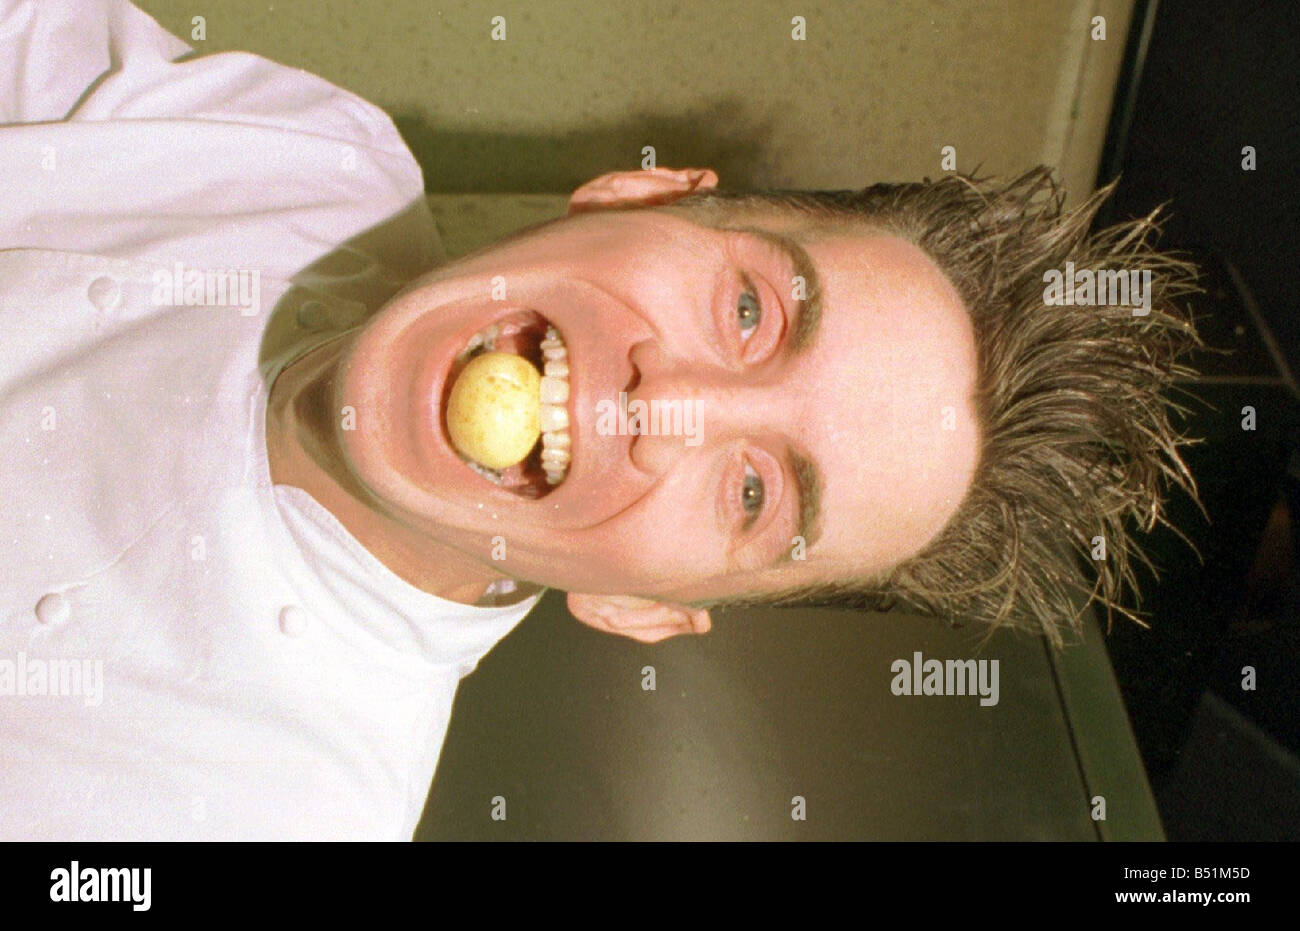 gary-rhodes-with-a-small-potato-in-his-mouth-B51M5D.jpg